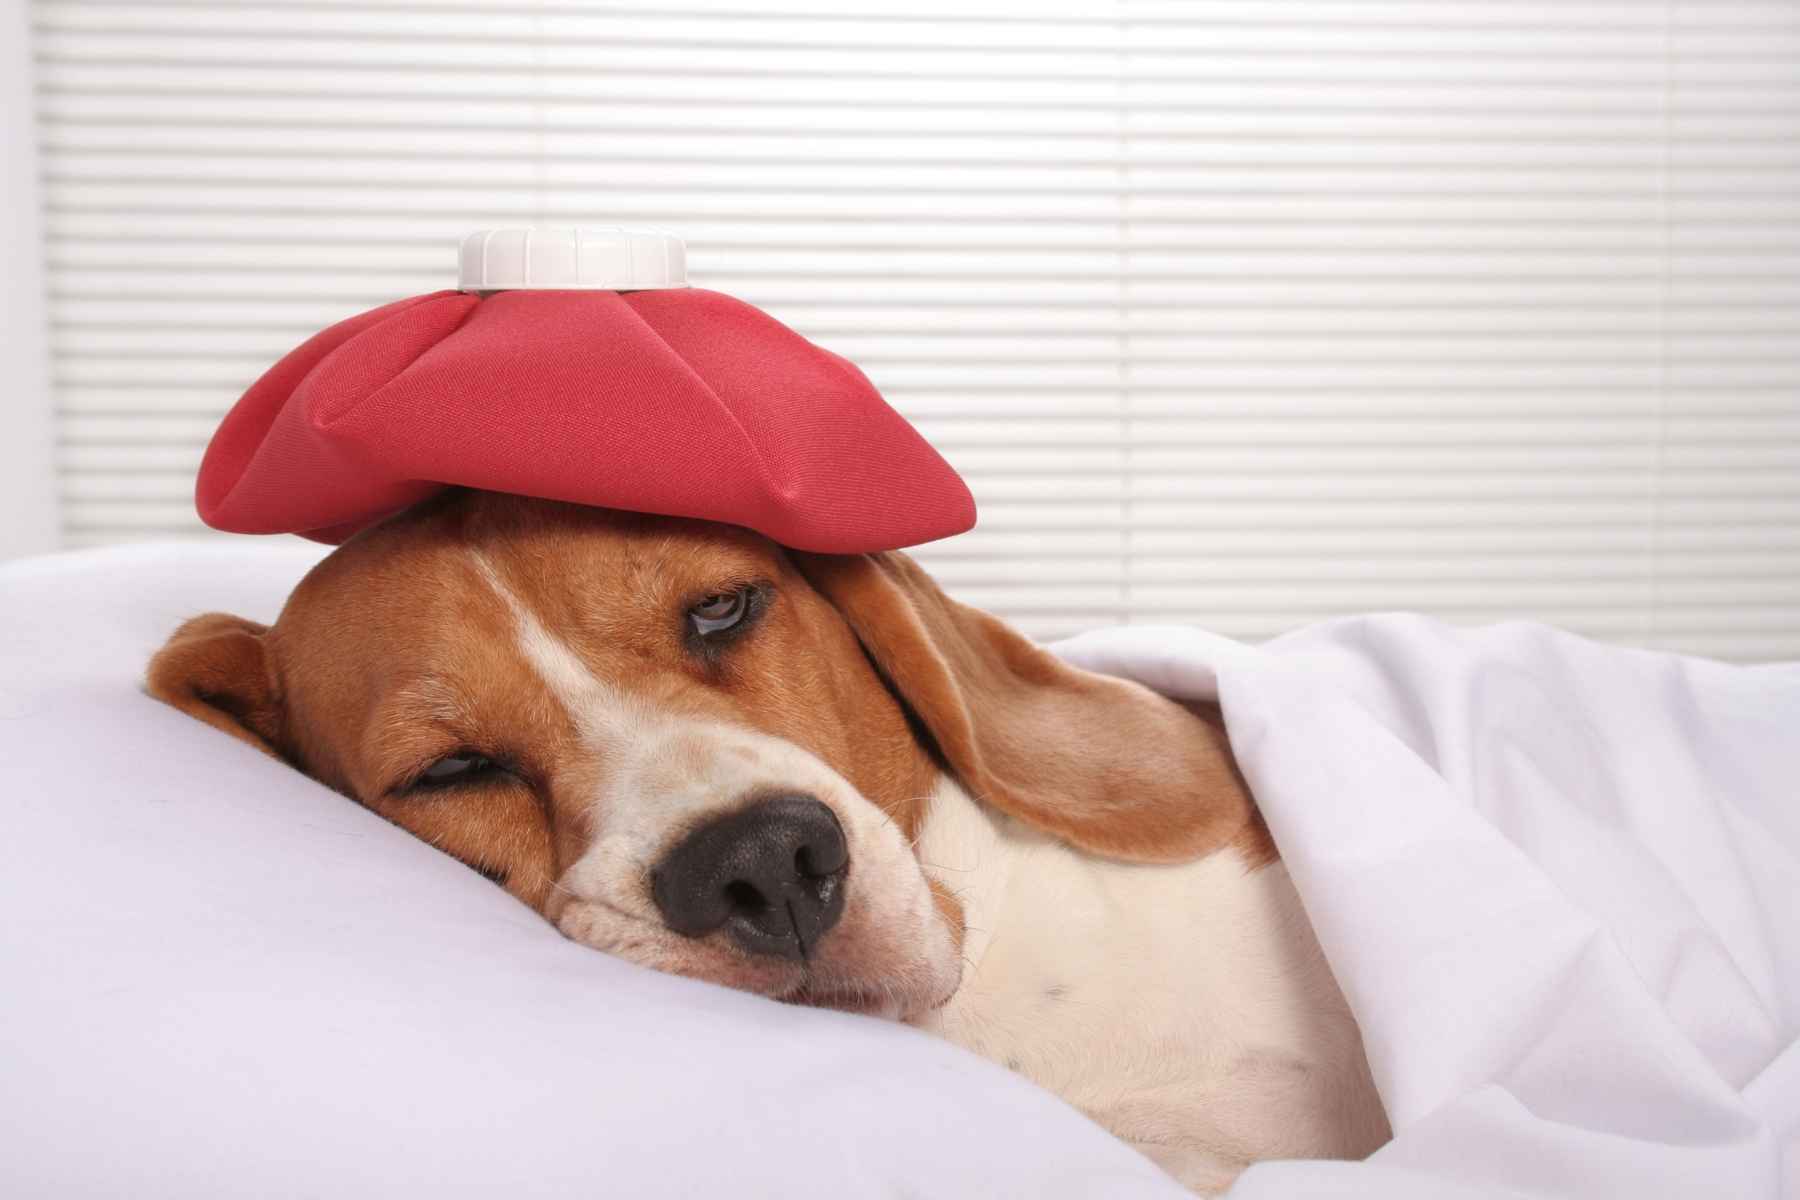 Dog with a fever lying in bed with an ice pack on its head